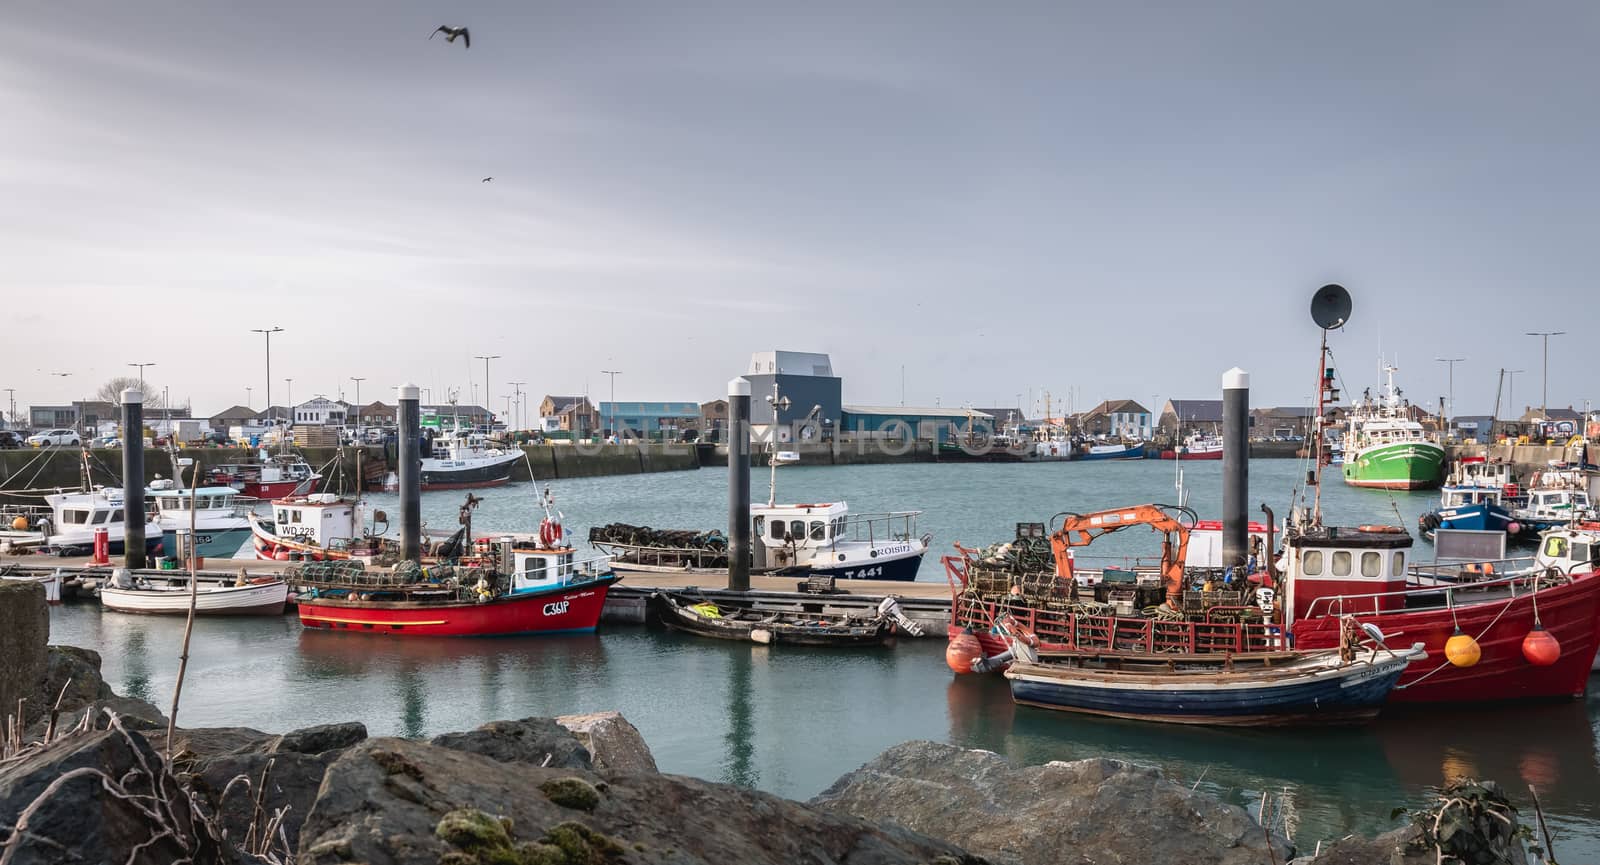 Howth near Dublin, Ireland - February 15, 2019: view of the fishing port of the city where are parked professional fishing boats on a winter day